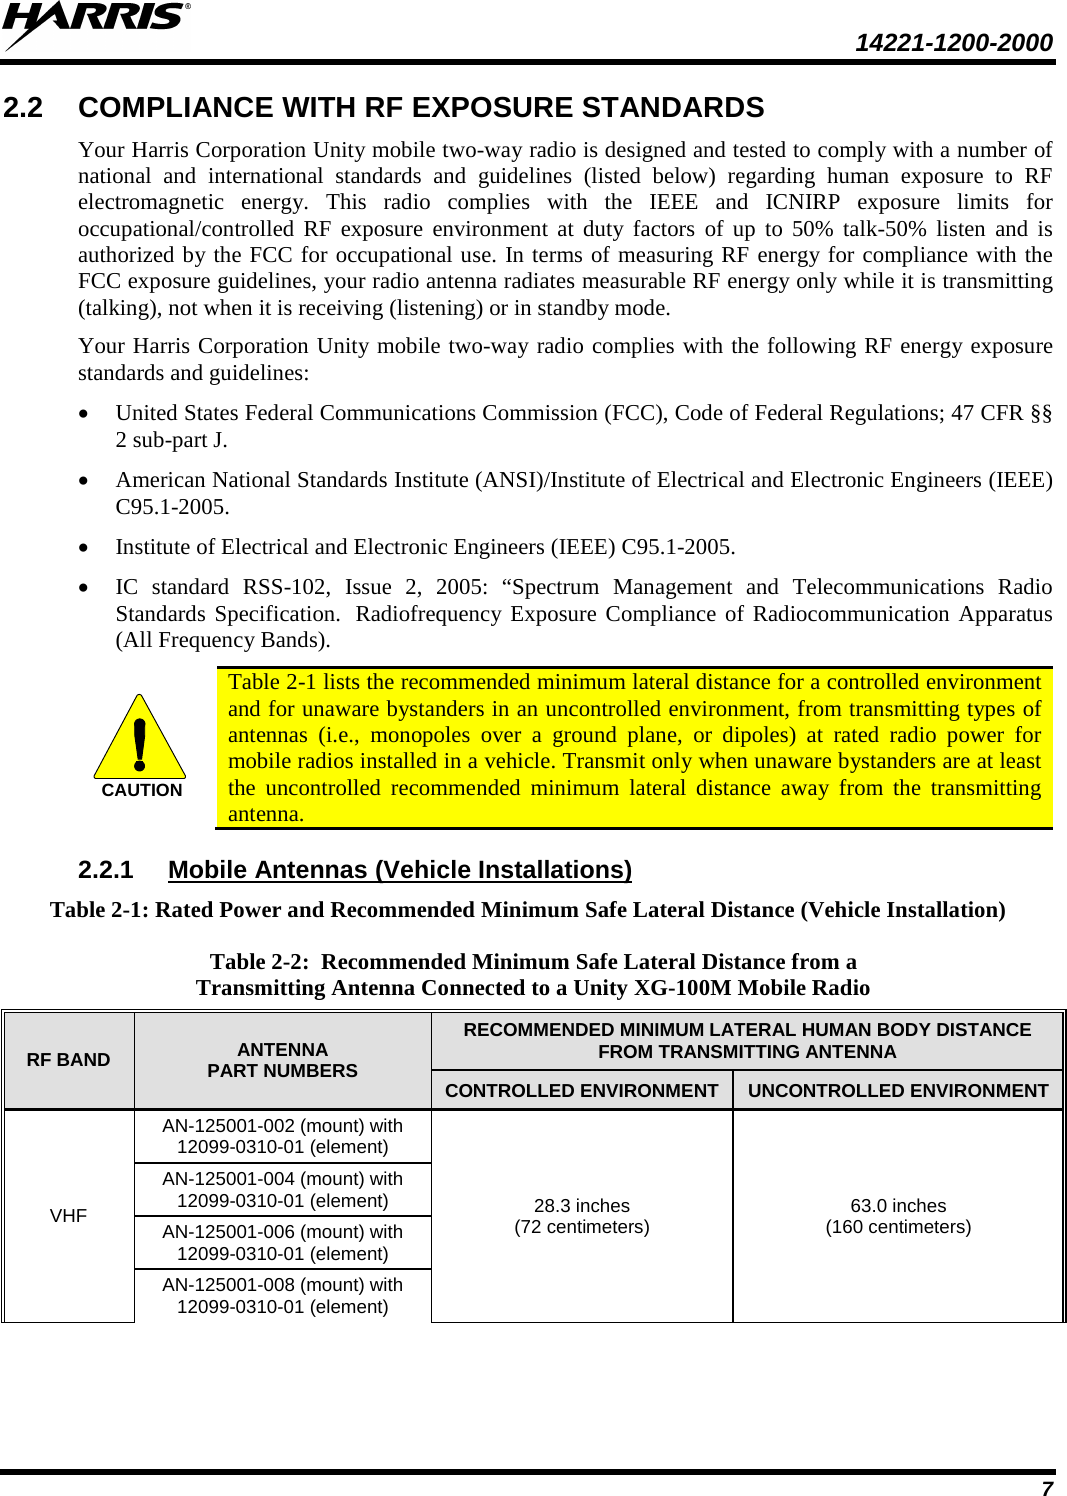  14221-1200-2000 7 2.2 COMPLIANCE WITH RF EXPOSURE STANDARDS Your Harris Corporation Unity mobile two-way radio is designed and tested to comply with a number of national and international standards and guidelines (listed below) regarding human exposure to RF electromagnetic energy.  This radio complies with the IEEE and ICNIRP exposure limits for occupational/controlled RF exposure environment at duty factors of up to 50% talk-50% listen and is authorized by the FCC for occupational use. In terms of measuring RF energy for compliance with the FCC exposure guidelines, your radio antenna radiates measurable RF energy only while it is transmitting (talking), not when it is receiving (listening) or in standby mode. Your Harris Corporation Unity mobile two-way radio complies with the following RF energy exposure standards and guidelines: • United States Federal Communications Commission (FCC), Code of Federal Regulations; 47 CFR §§ 2 sub-part J. • American National Standards Institute (ANSI)/Institute of Electrical and Electronic Engineers (IEEE) C95.1-2005. • Institute of Electrical and Electronic Engineers (IEEE) C95.1-2005. • IC standard RSS-102, Issue 2, 2005: “Spectrum Management and Telecommunications Radio Standards Specification.  Radiofrequency Exposure Compliance of Radiocommunication Apparatus (All Frequency Bands). CAUTION Table 2-1 lists the recommended minimum lateral distance for a controlled environment and for unaware bystanders in an uncontrolled environment, from transmitting types of antennas (i.e., monopoles over a ground plane, or dipoles) at rated radio power for mobile radios installed in a vehicle. Transmit only when unaware bystanders are at least the uncontrolled recommended minimum lateral distance away from the transmitting antenna. 2.2.1 Mobile Antennas (Vehicle Installations) Table 2-1: Rated Power and Recommended Minimum Safe Lateral Distance (Vehicle Installation) Table 2-2:  Recommended Minimum Safe Lateral Distance from a Transmitting Antenna Connected to a Unity XG-100M Mobile Radio RF BAND ANTENNA PART NUMBERS RECOMMENDED MINIMUM LATERAL HUMAN BODY DISTANCE FROM TRANSMITTING ANTENNA CONTROLLED ENVIRONMENT UNCONTROLLED ENVIRONMENT VHF AN-125001-002 (mount) with 12099-0310-01 (element) 28.3 inches (72 centimeters) 63.0 inches (160 centimeters) AN-125001-004 (mount) with 12099-0310-01 (element) AN-125001-006 (mount) with 12099-0310-01 (element) AN-125001-008 (mount) with 12099-0310-01 (element) 